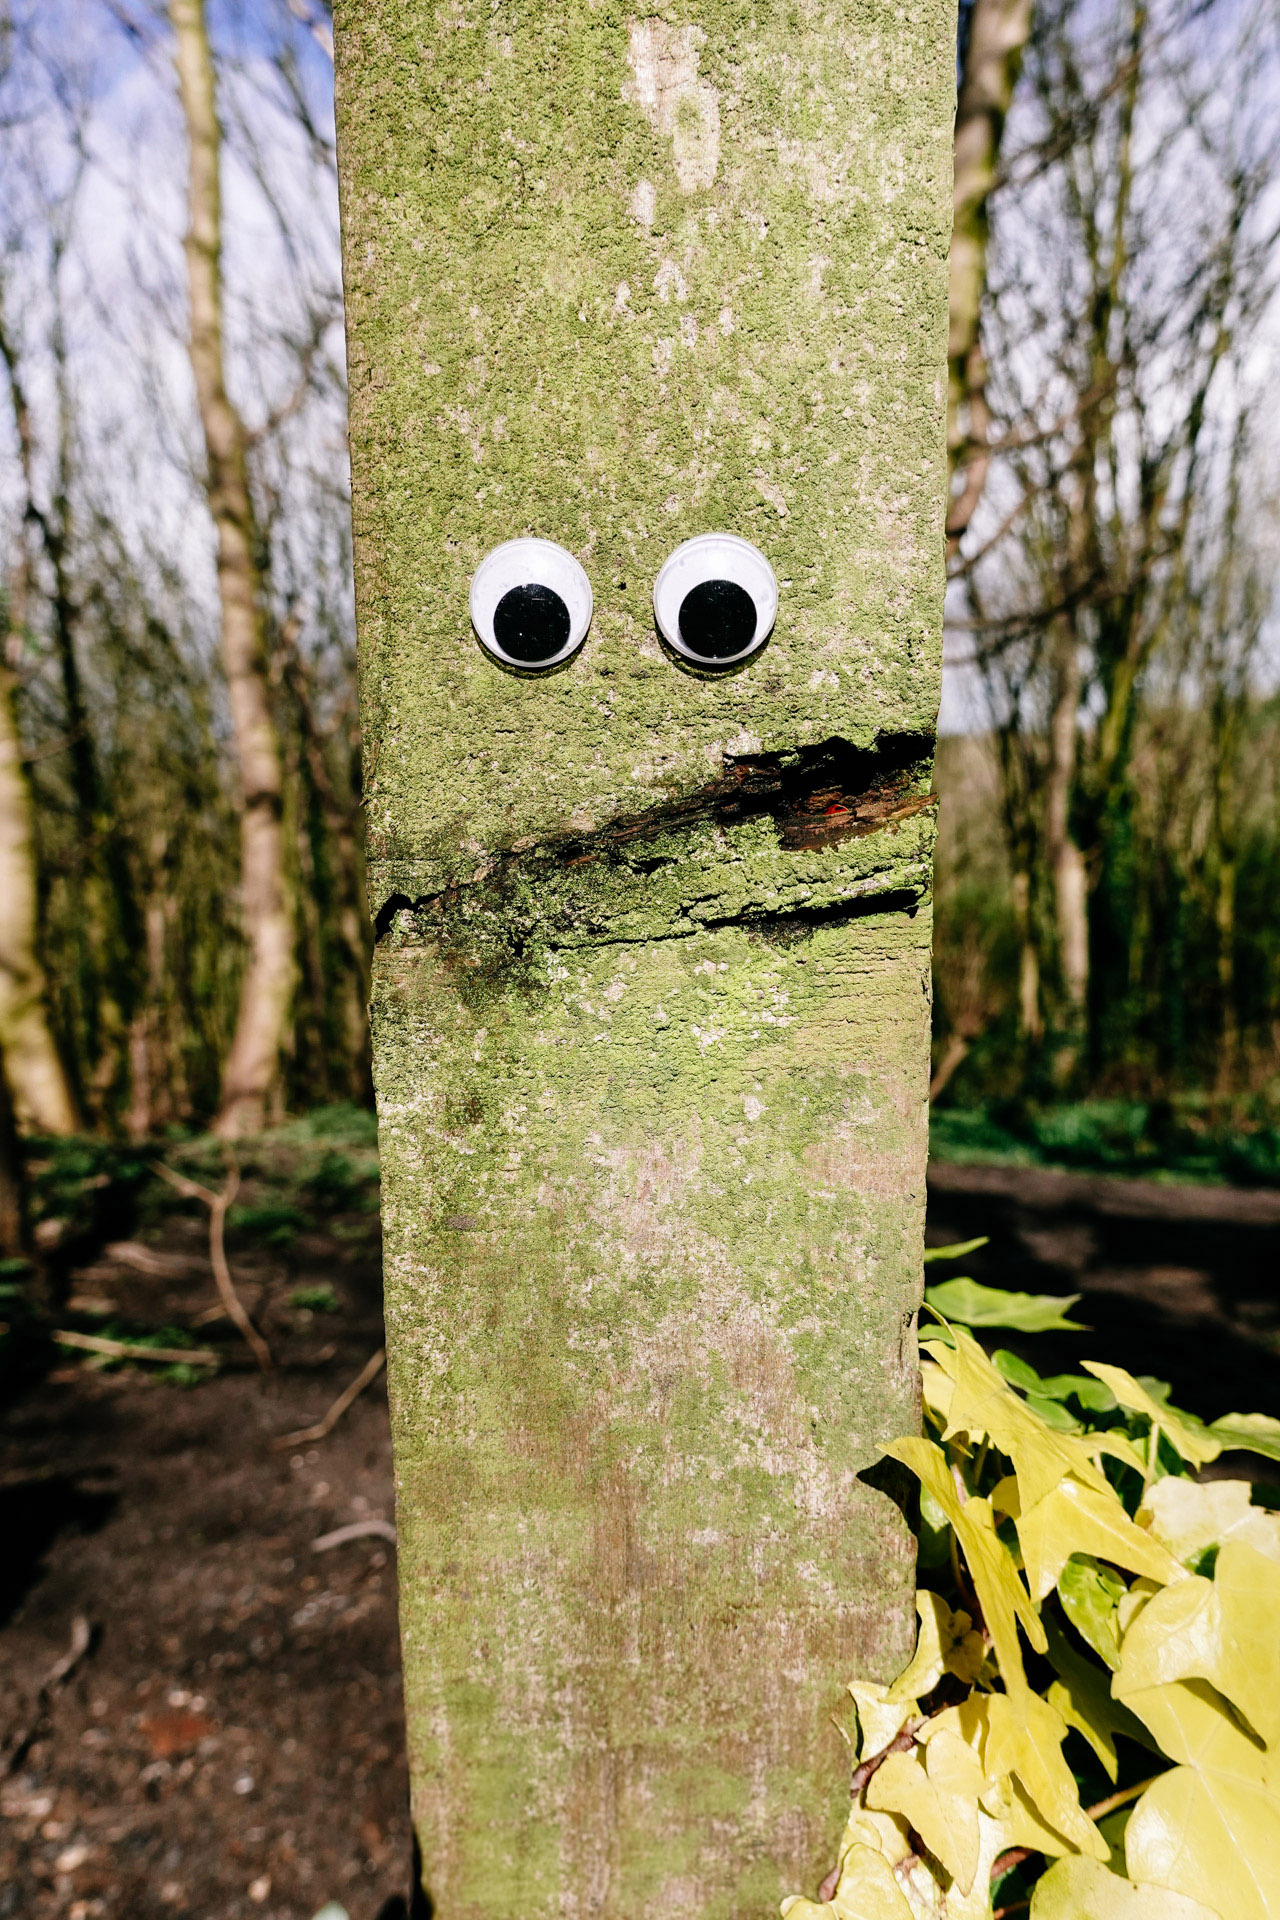 Fence Post With Stick on Eyes